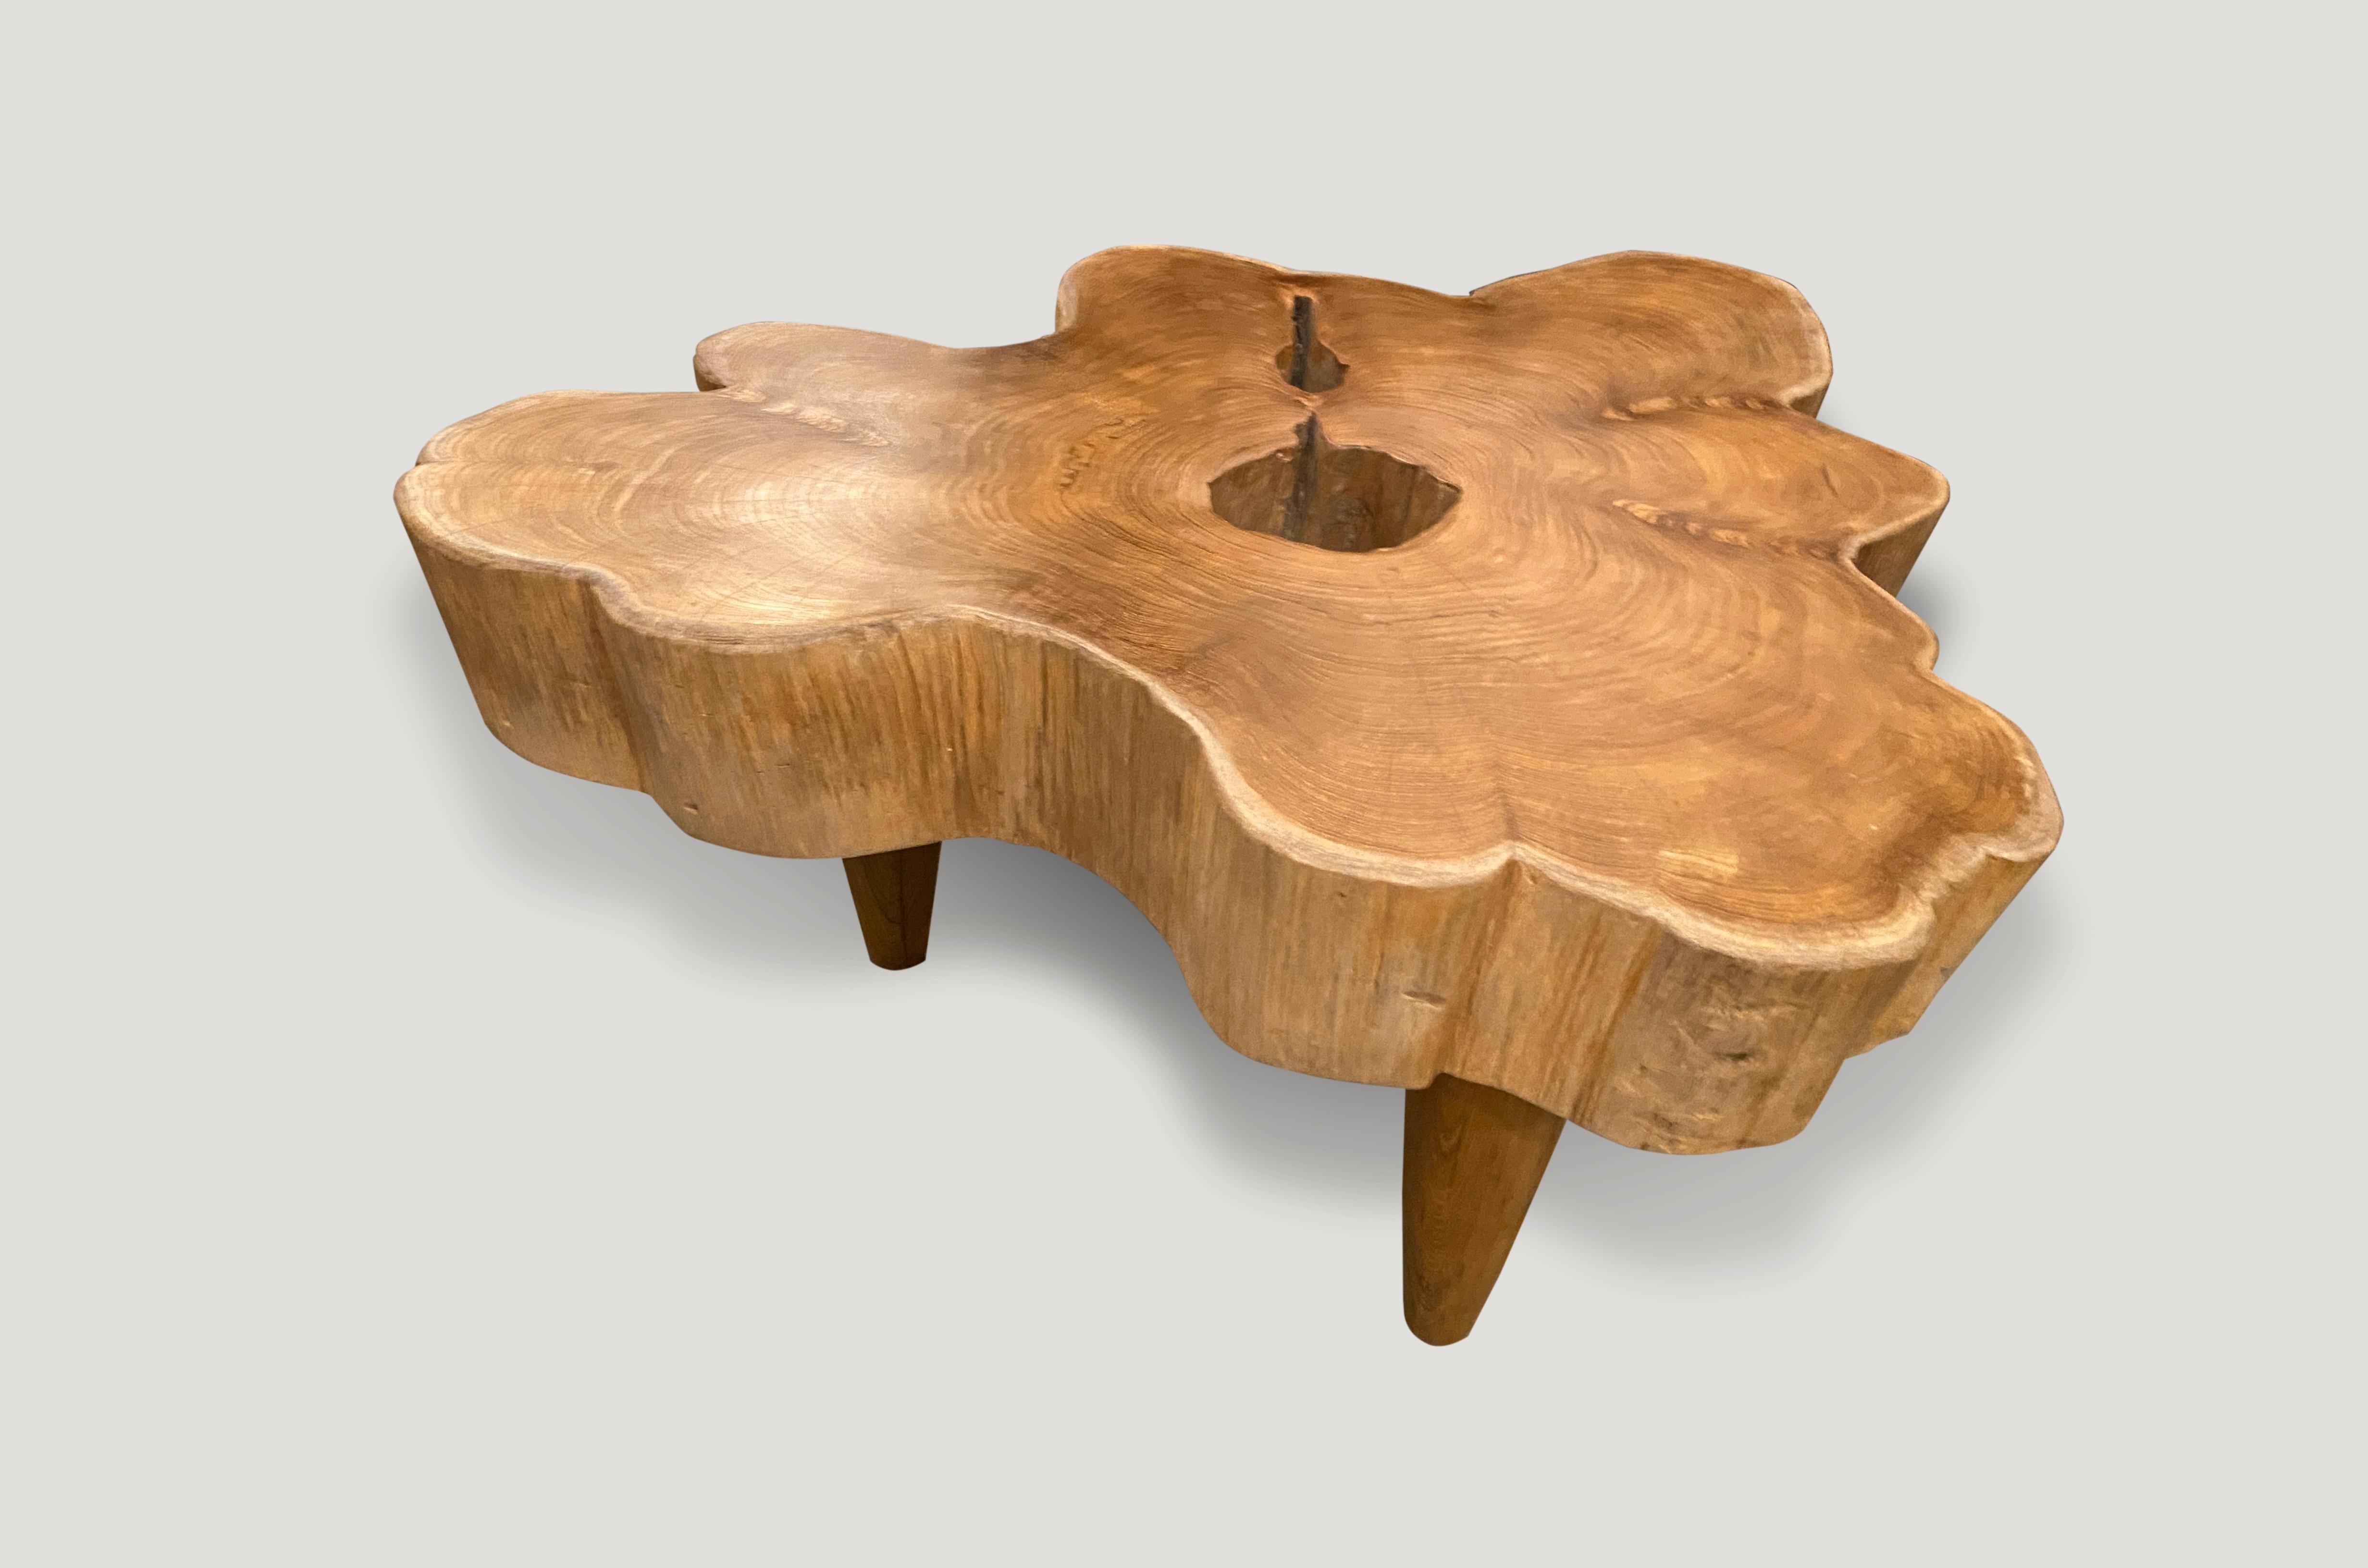 Reclaimed teak coffee table with a natural oil finish on the top and the sides smooth and left raw. Impressive single 5” slab top floating on mid century style legs. Organic with a twist. All one of a kind.

Own an Andrianna Shamaris